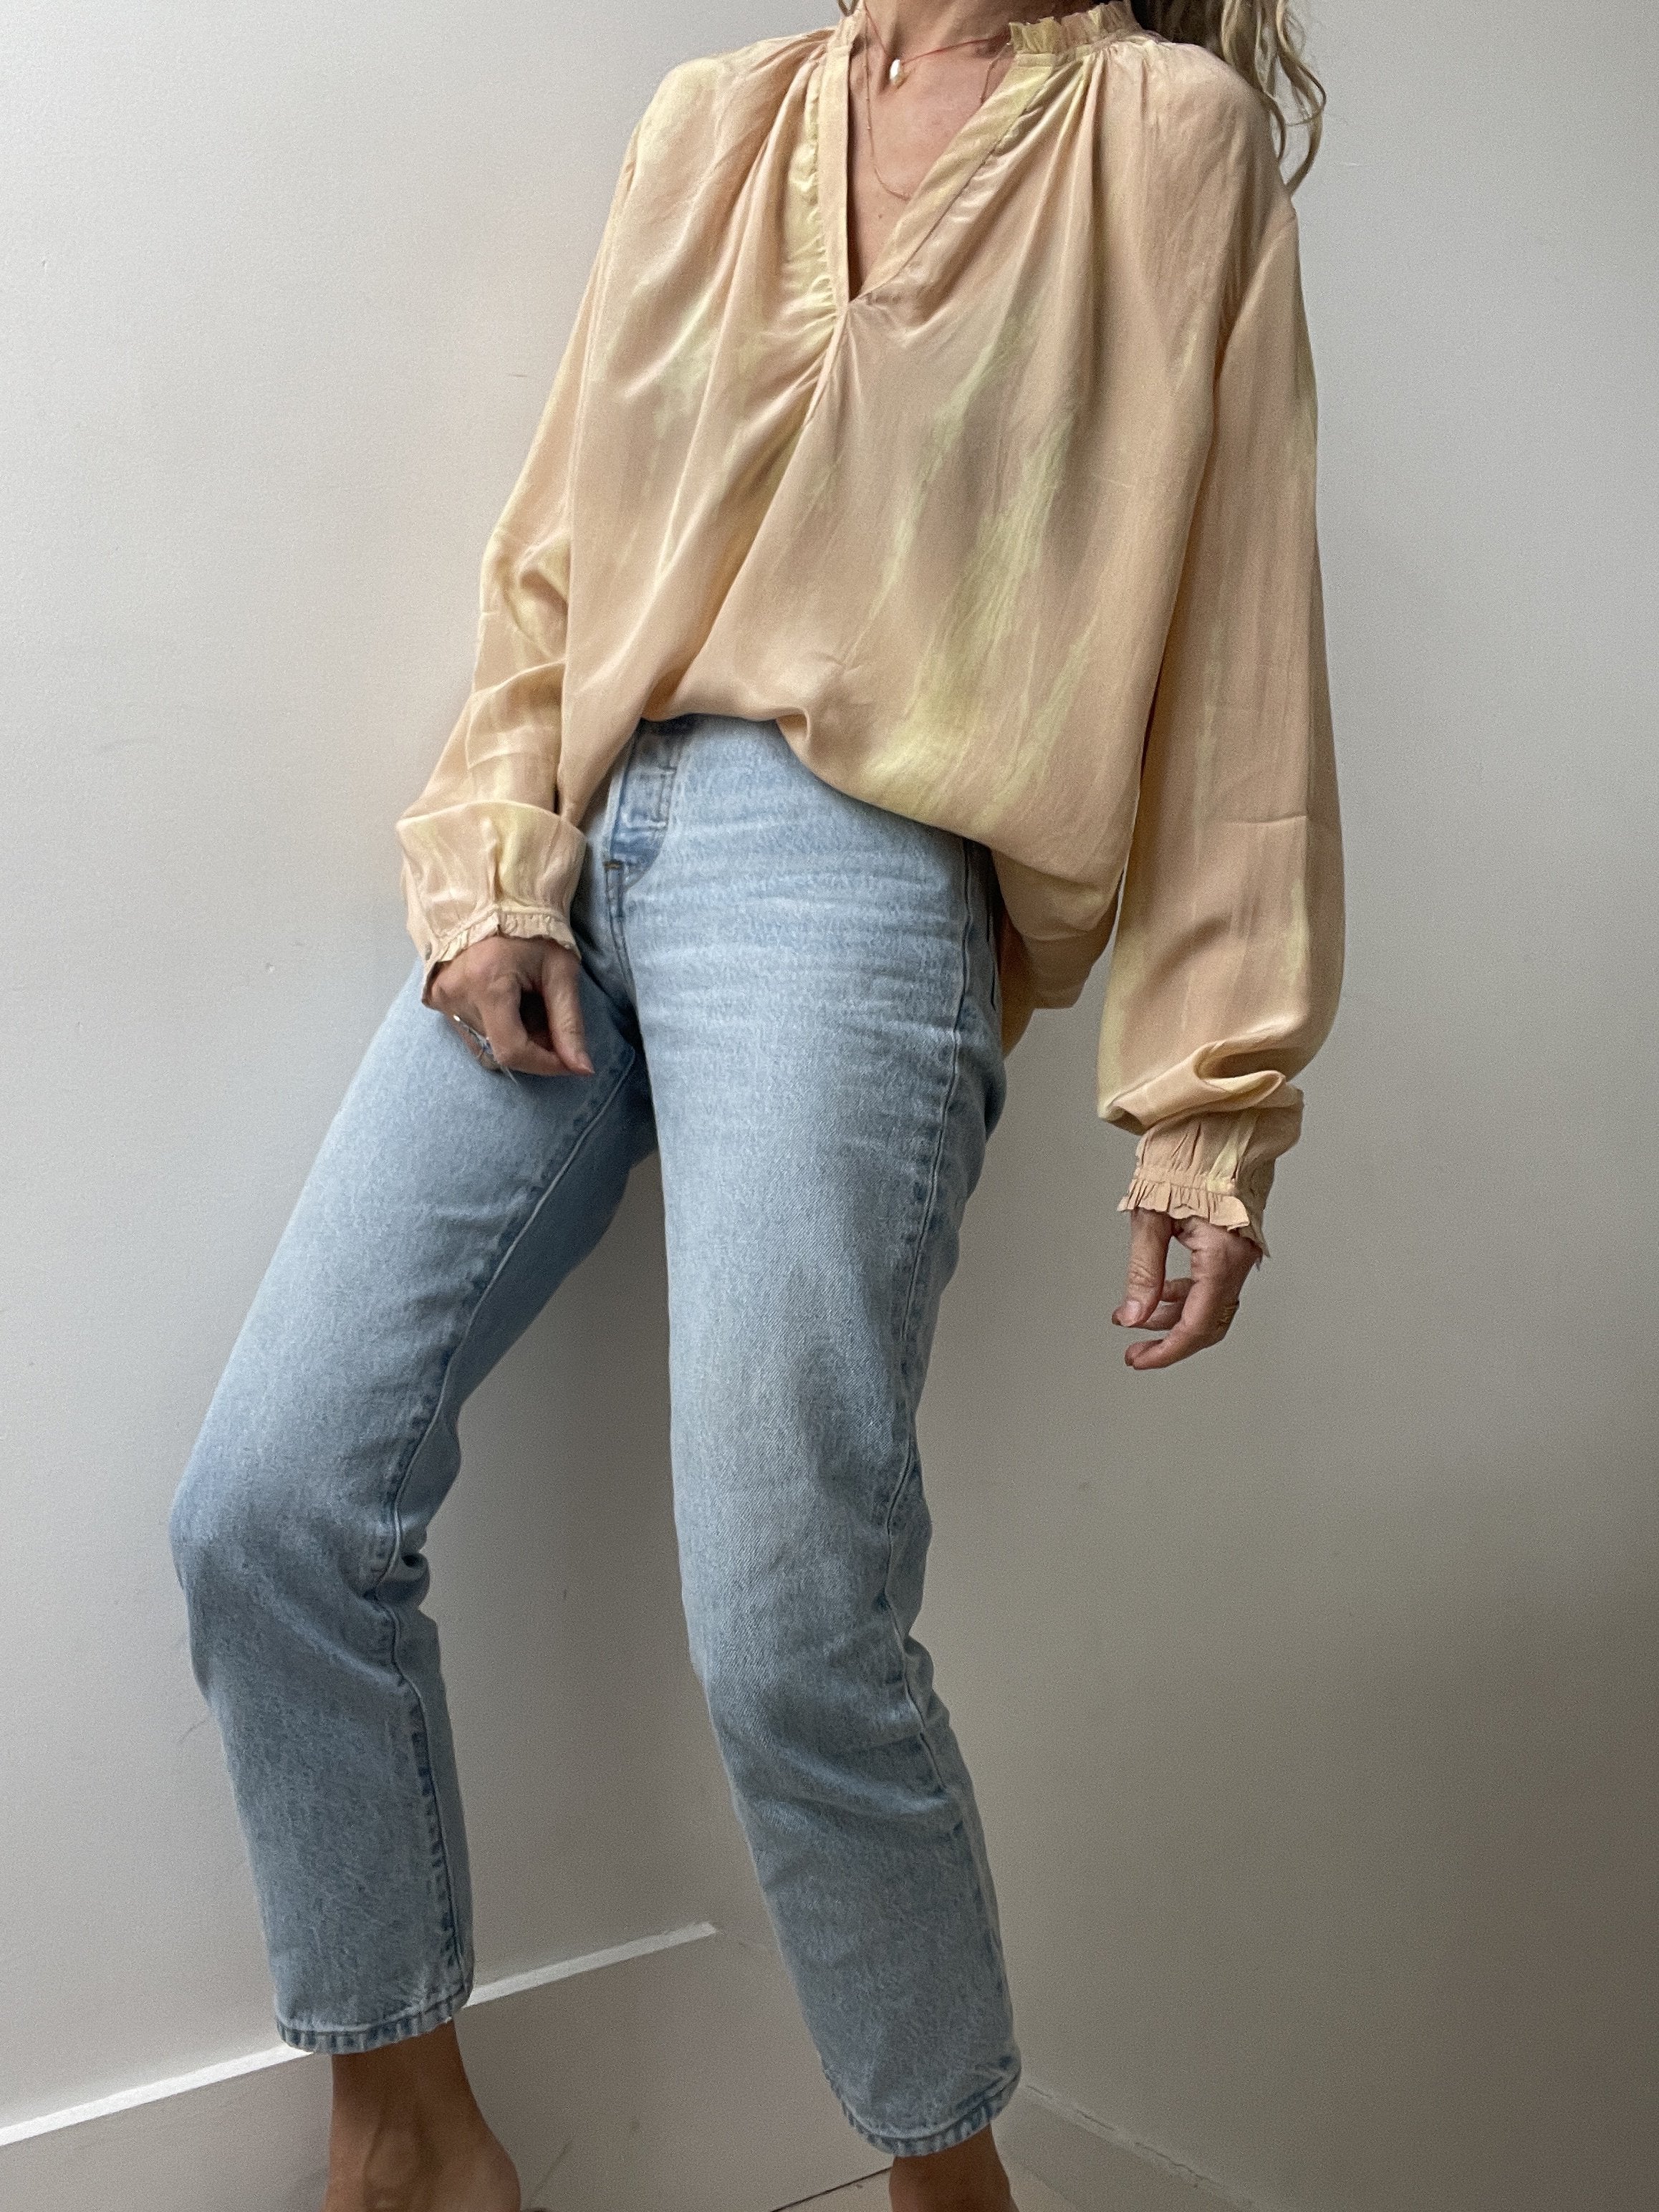 Project AJ 117 Blouses Project AJ 117 Glory Blouse in Gold